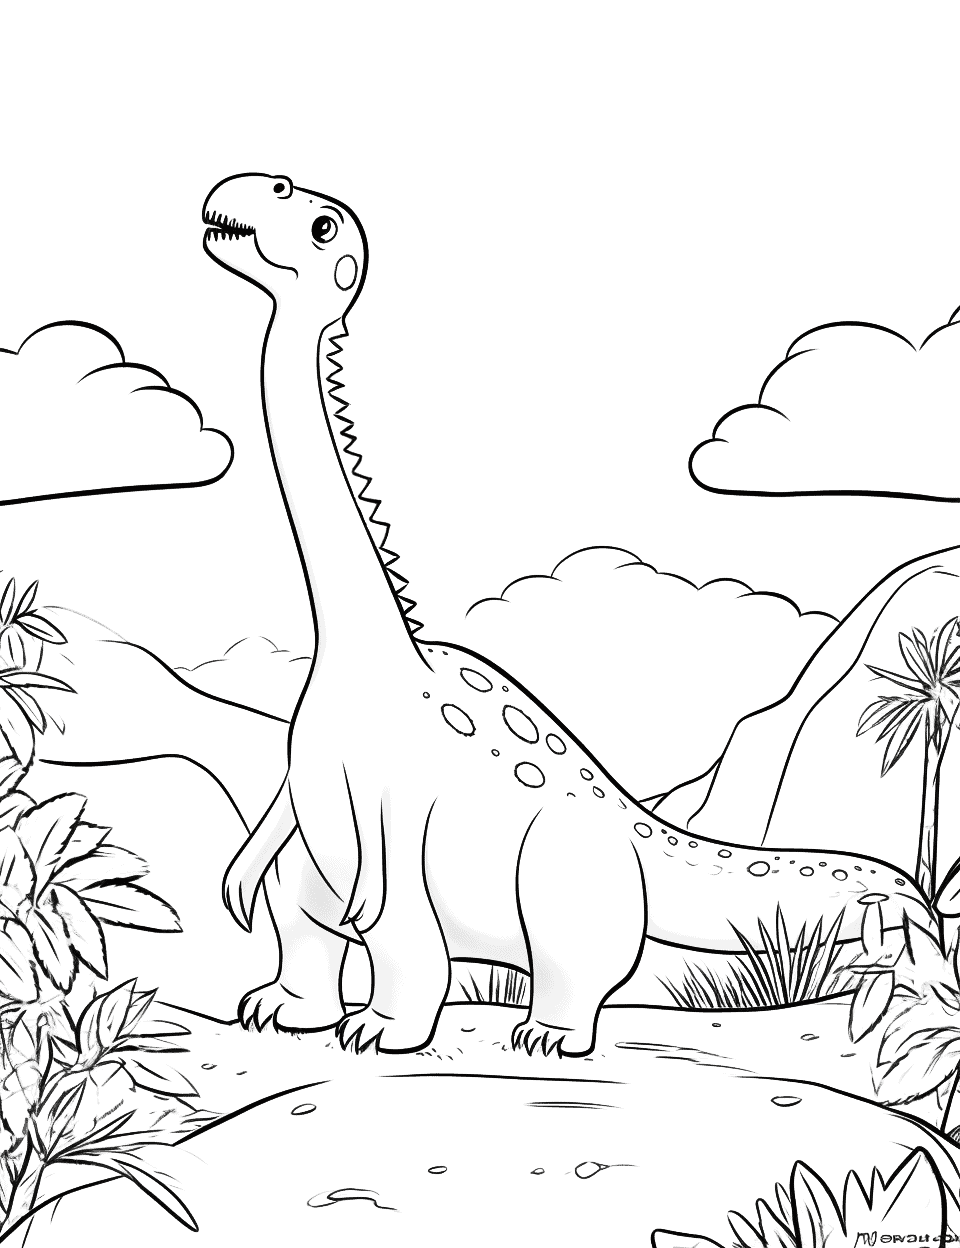 Camp Cretaceous Coloring Page - A scene from Camp Cretaceous, featuring dinosaurs under the sky.